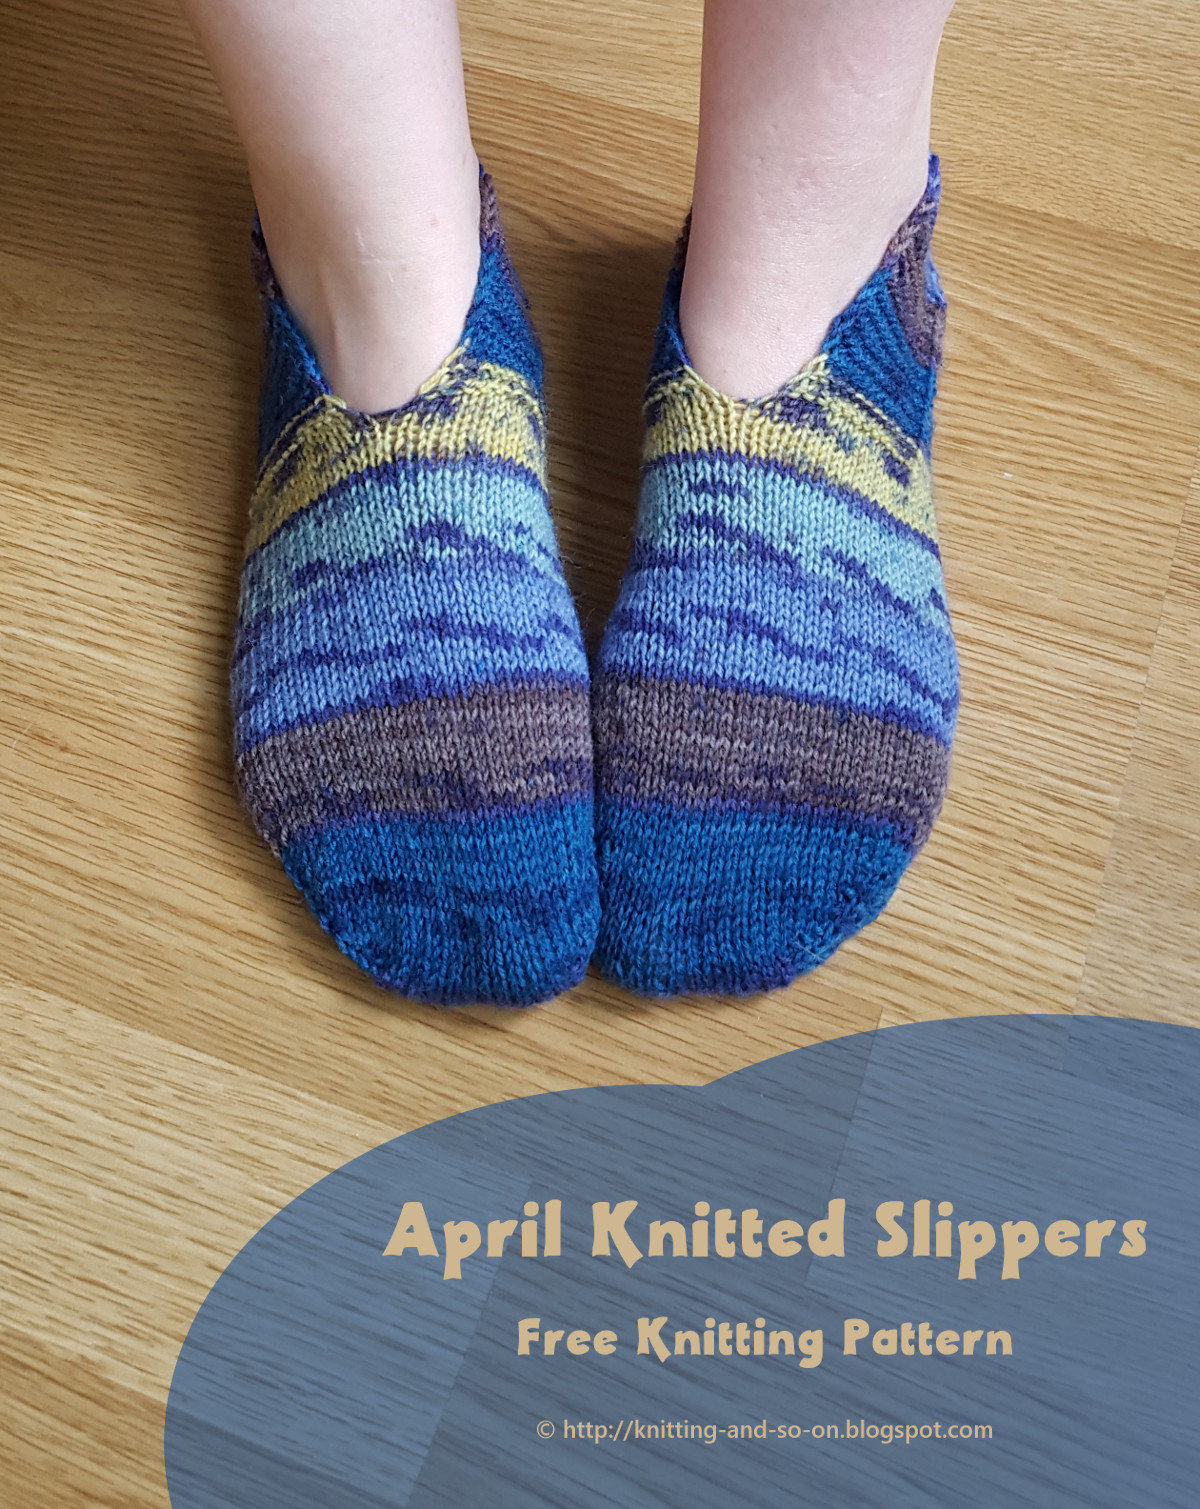 Knitting and so on: April Knitted Slippers